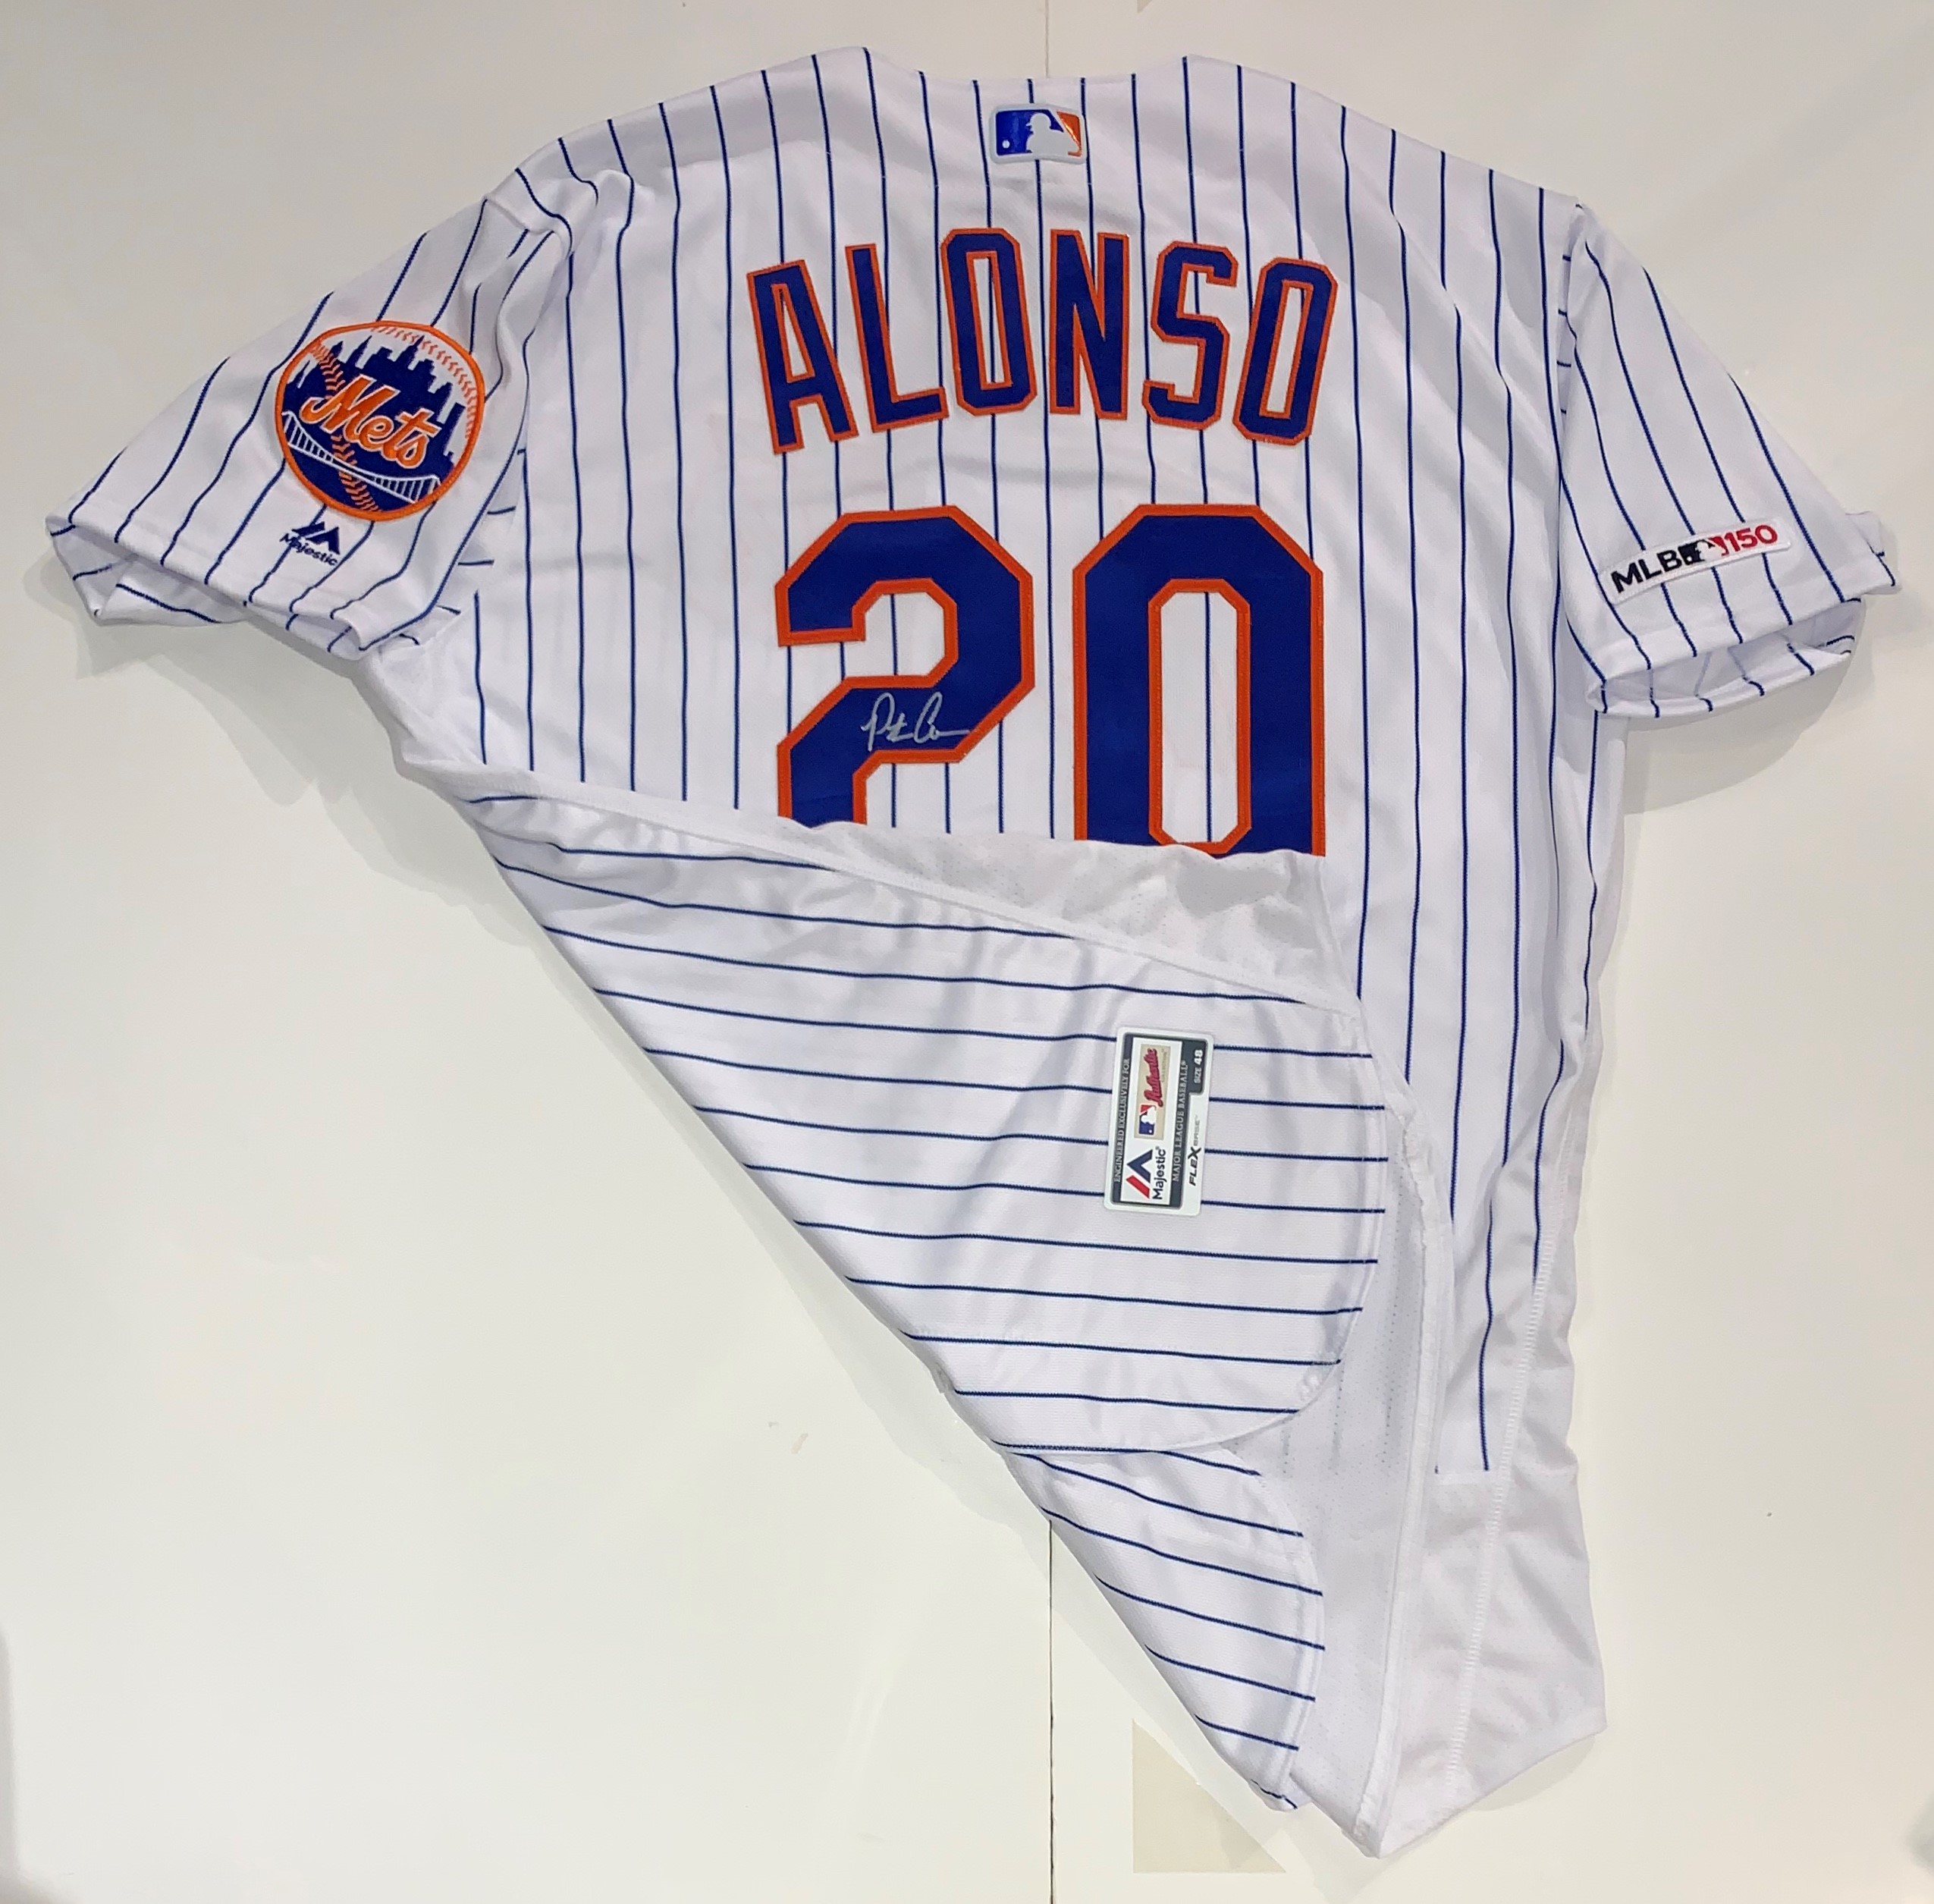 Pete Alonso #20 - Autographed Game Used White Pinstripe Jersey